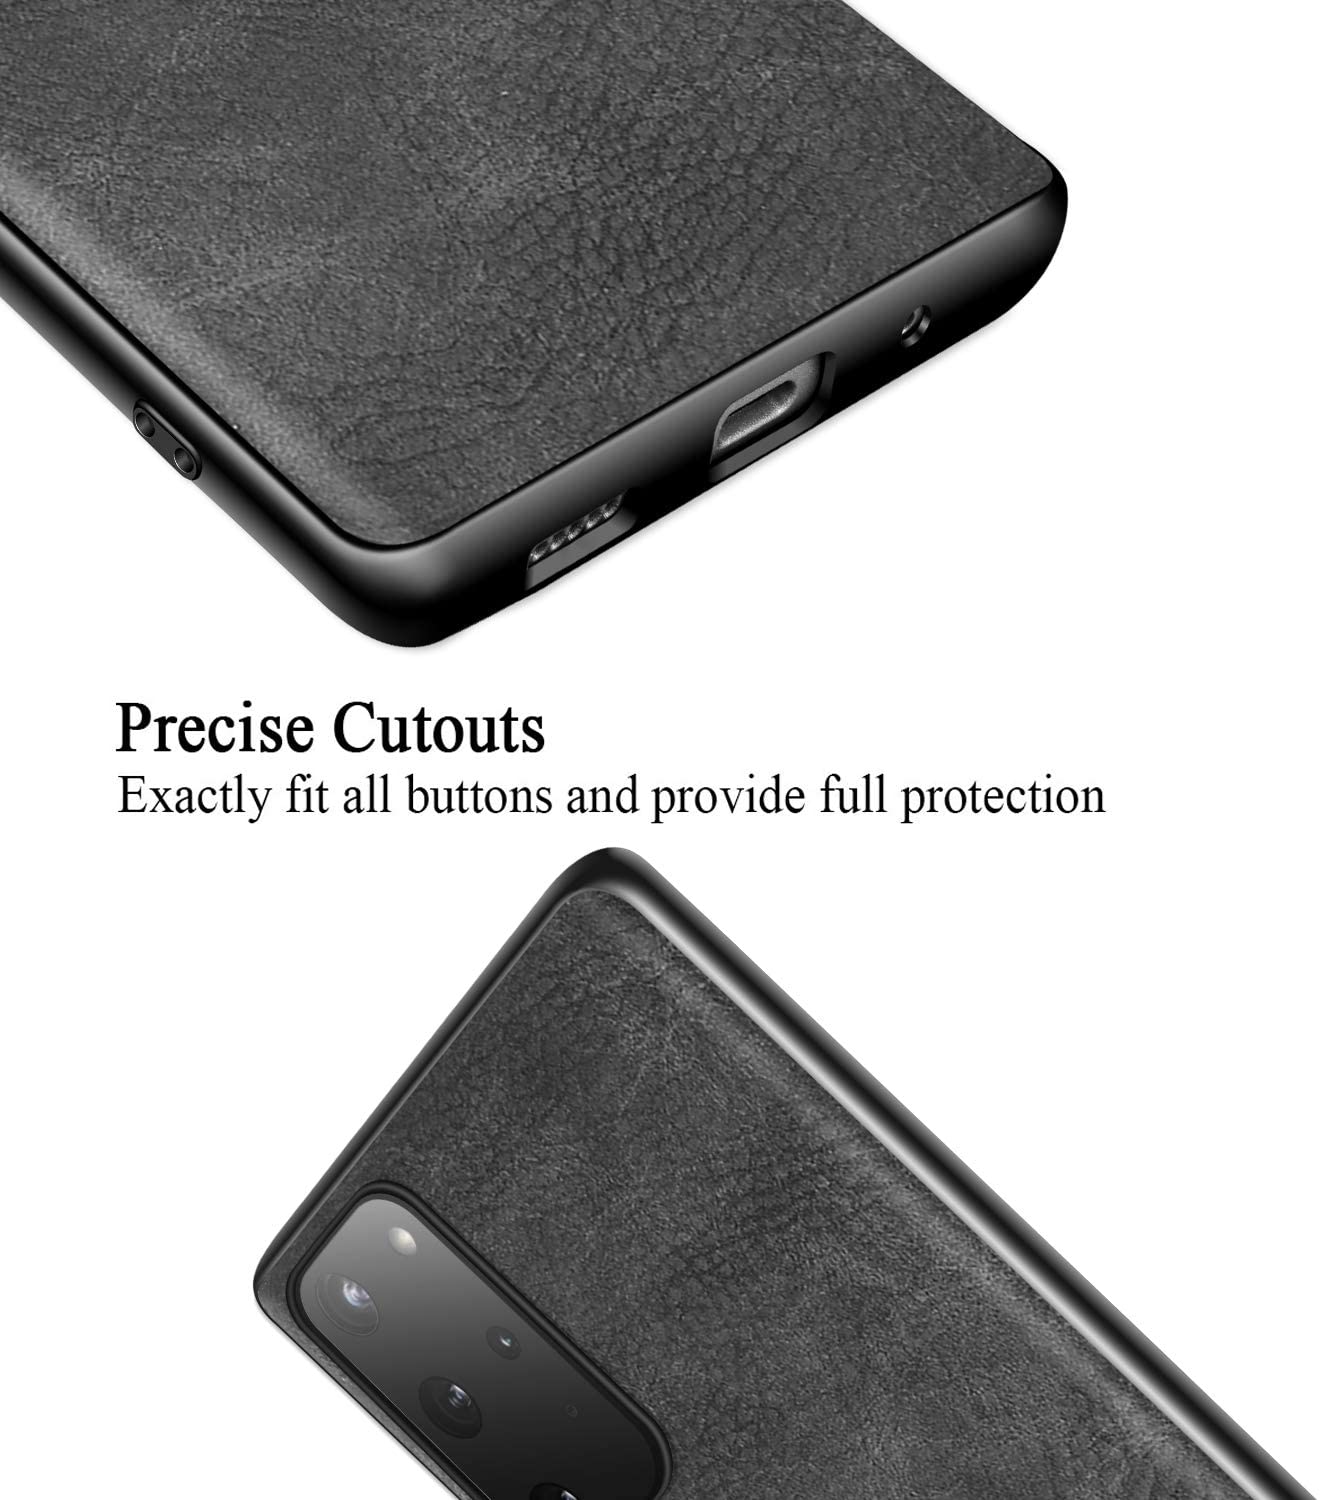 Samsung Galaxy S20 Plus 360 degree protection leather back case cover by excelsior